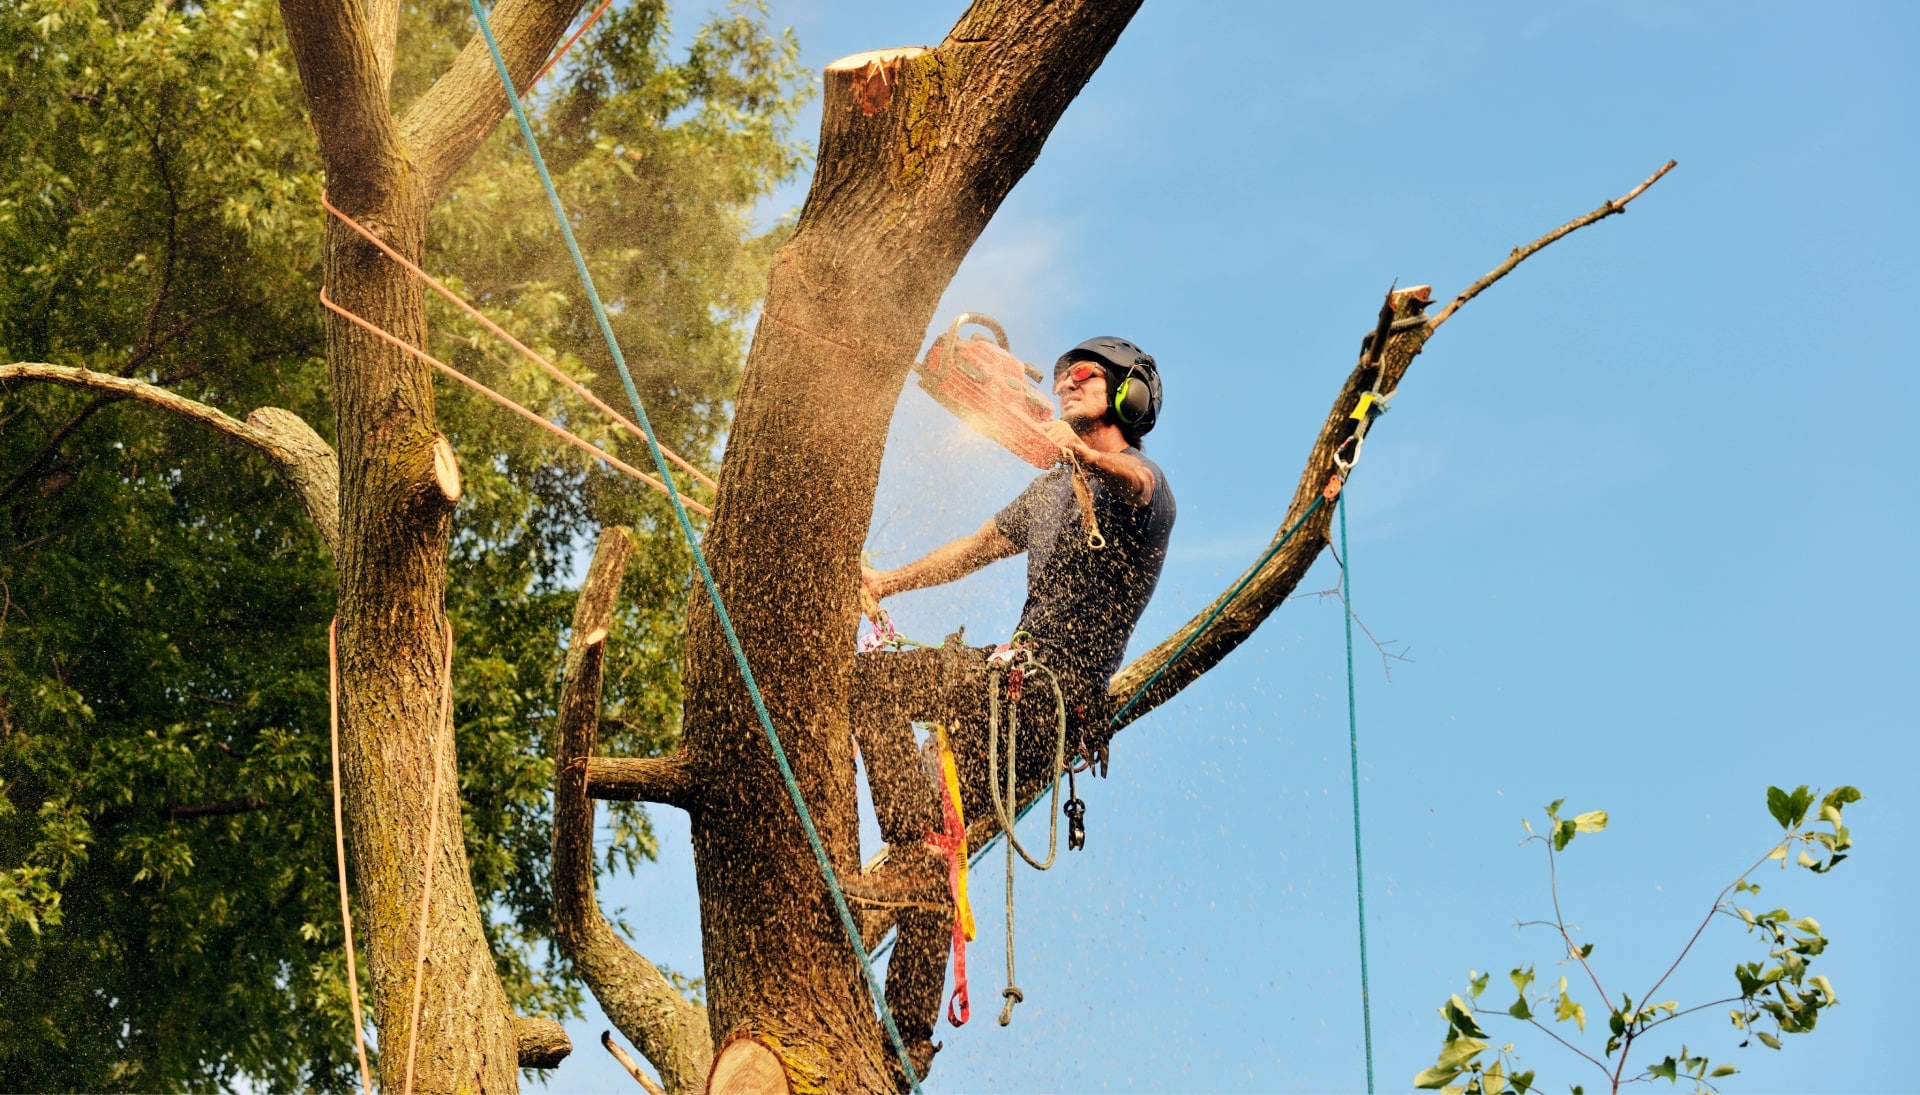 Northern Kentucky tree removal experts solve tree issues.